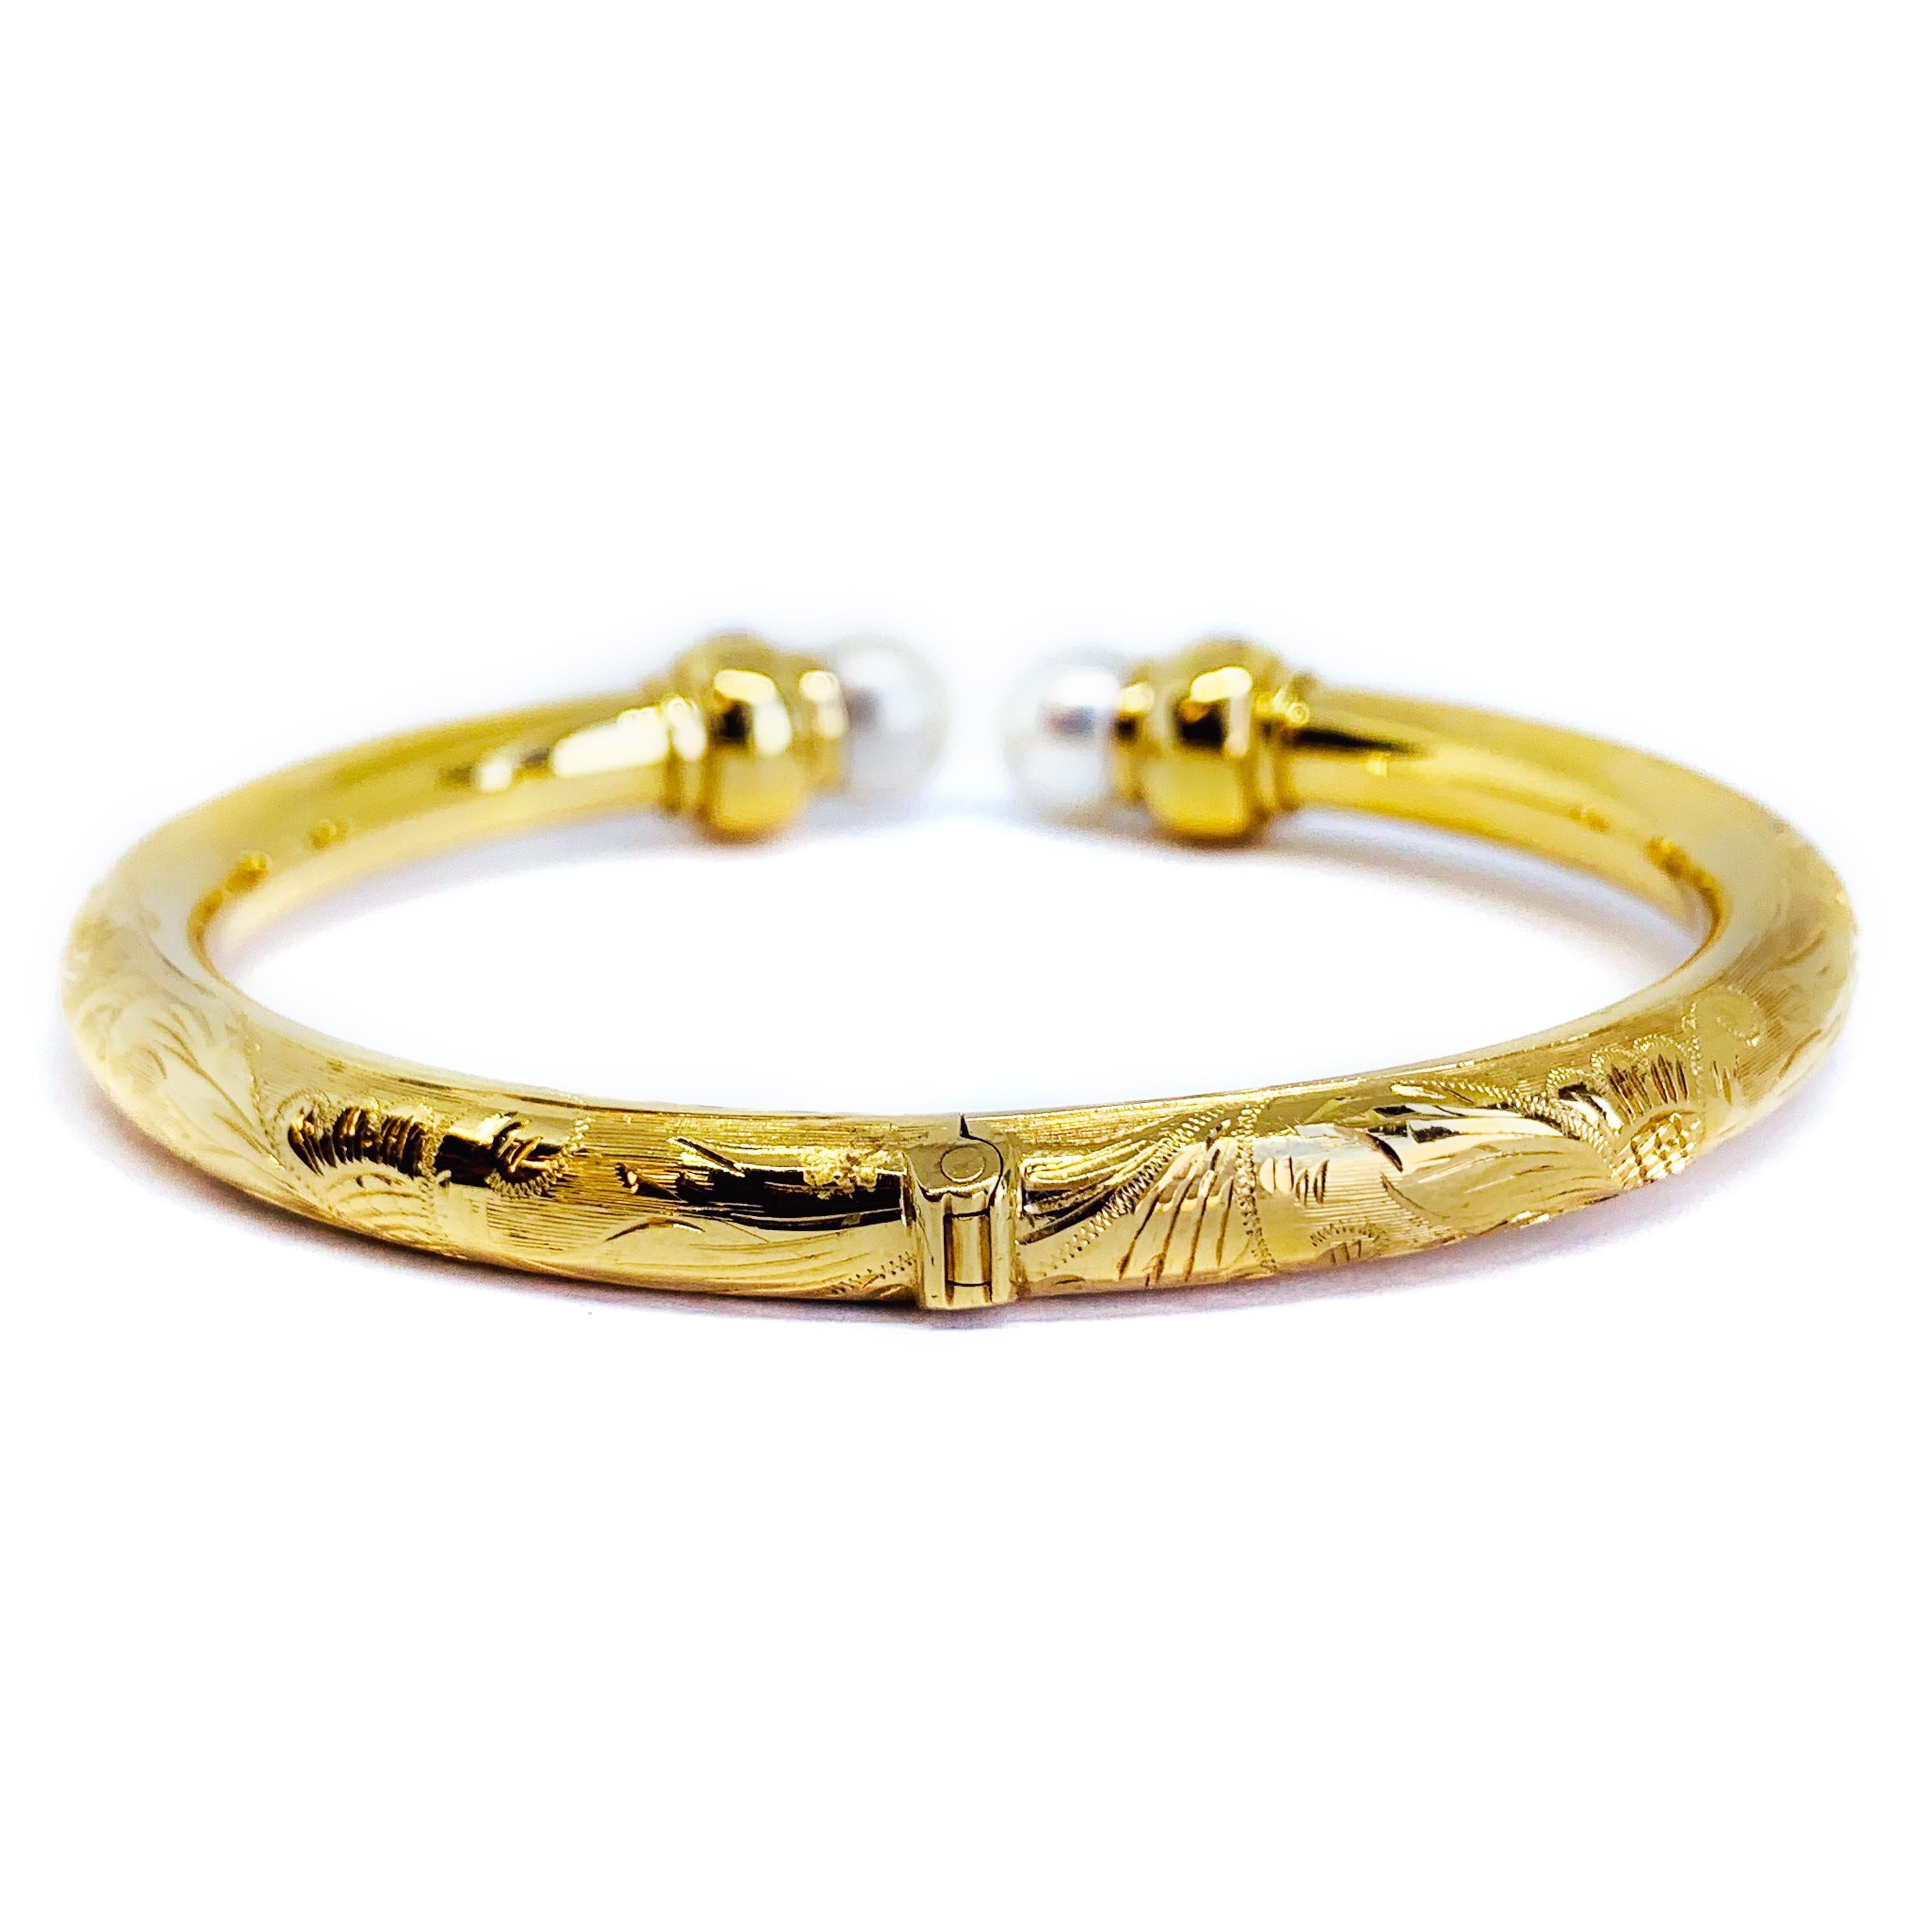 Princess Cut Hand Engraved Yellow Gold Open Bangle Bracelet with Pearls and Rubis